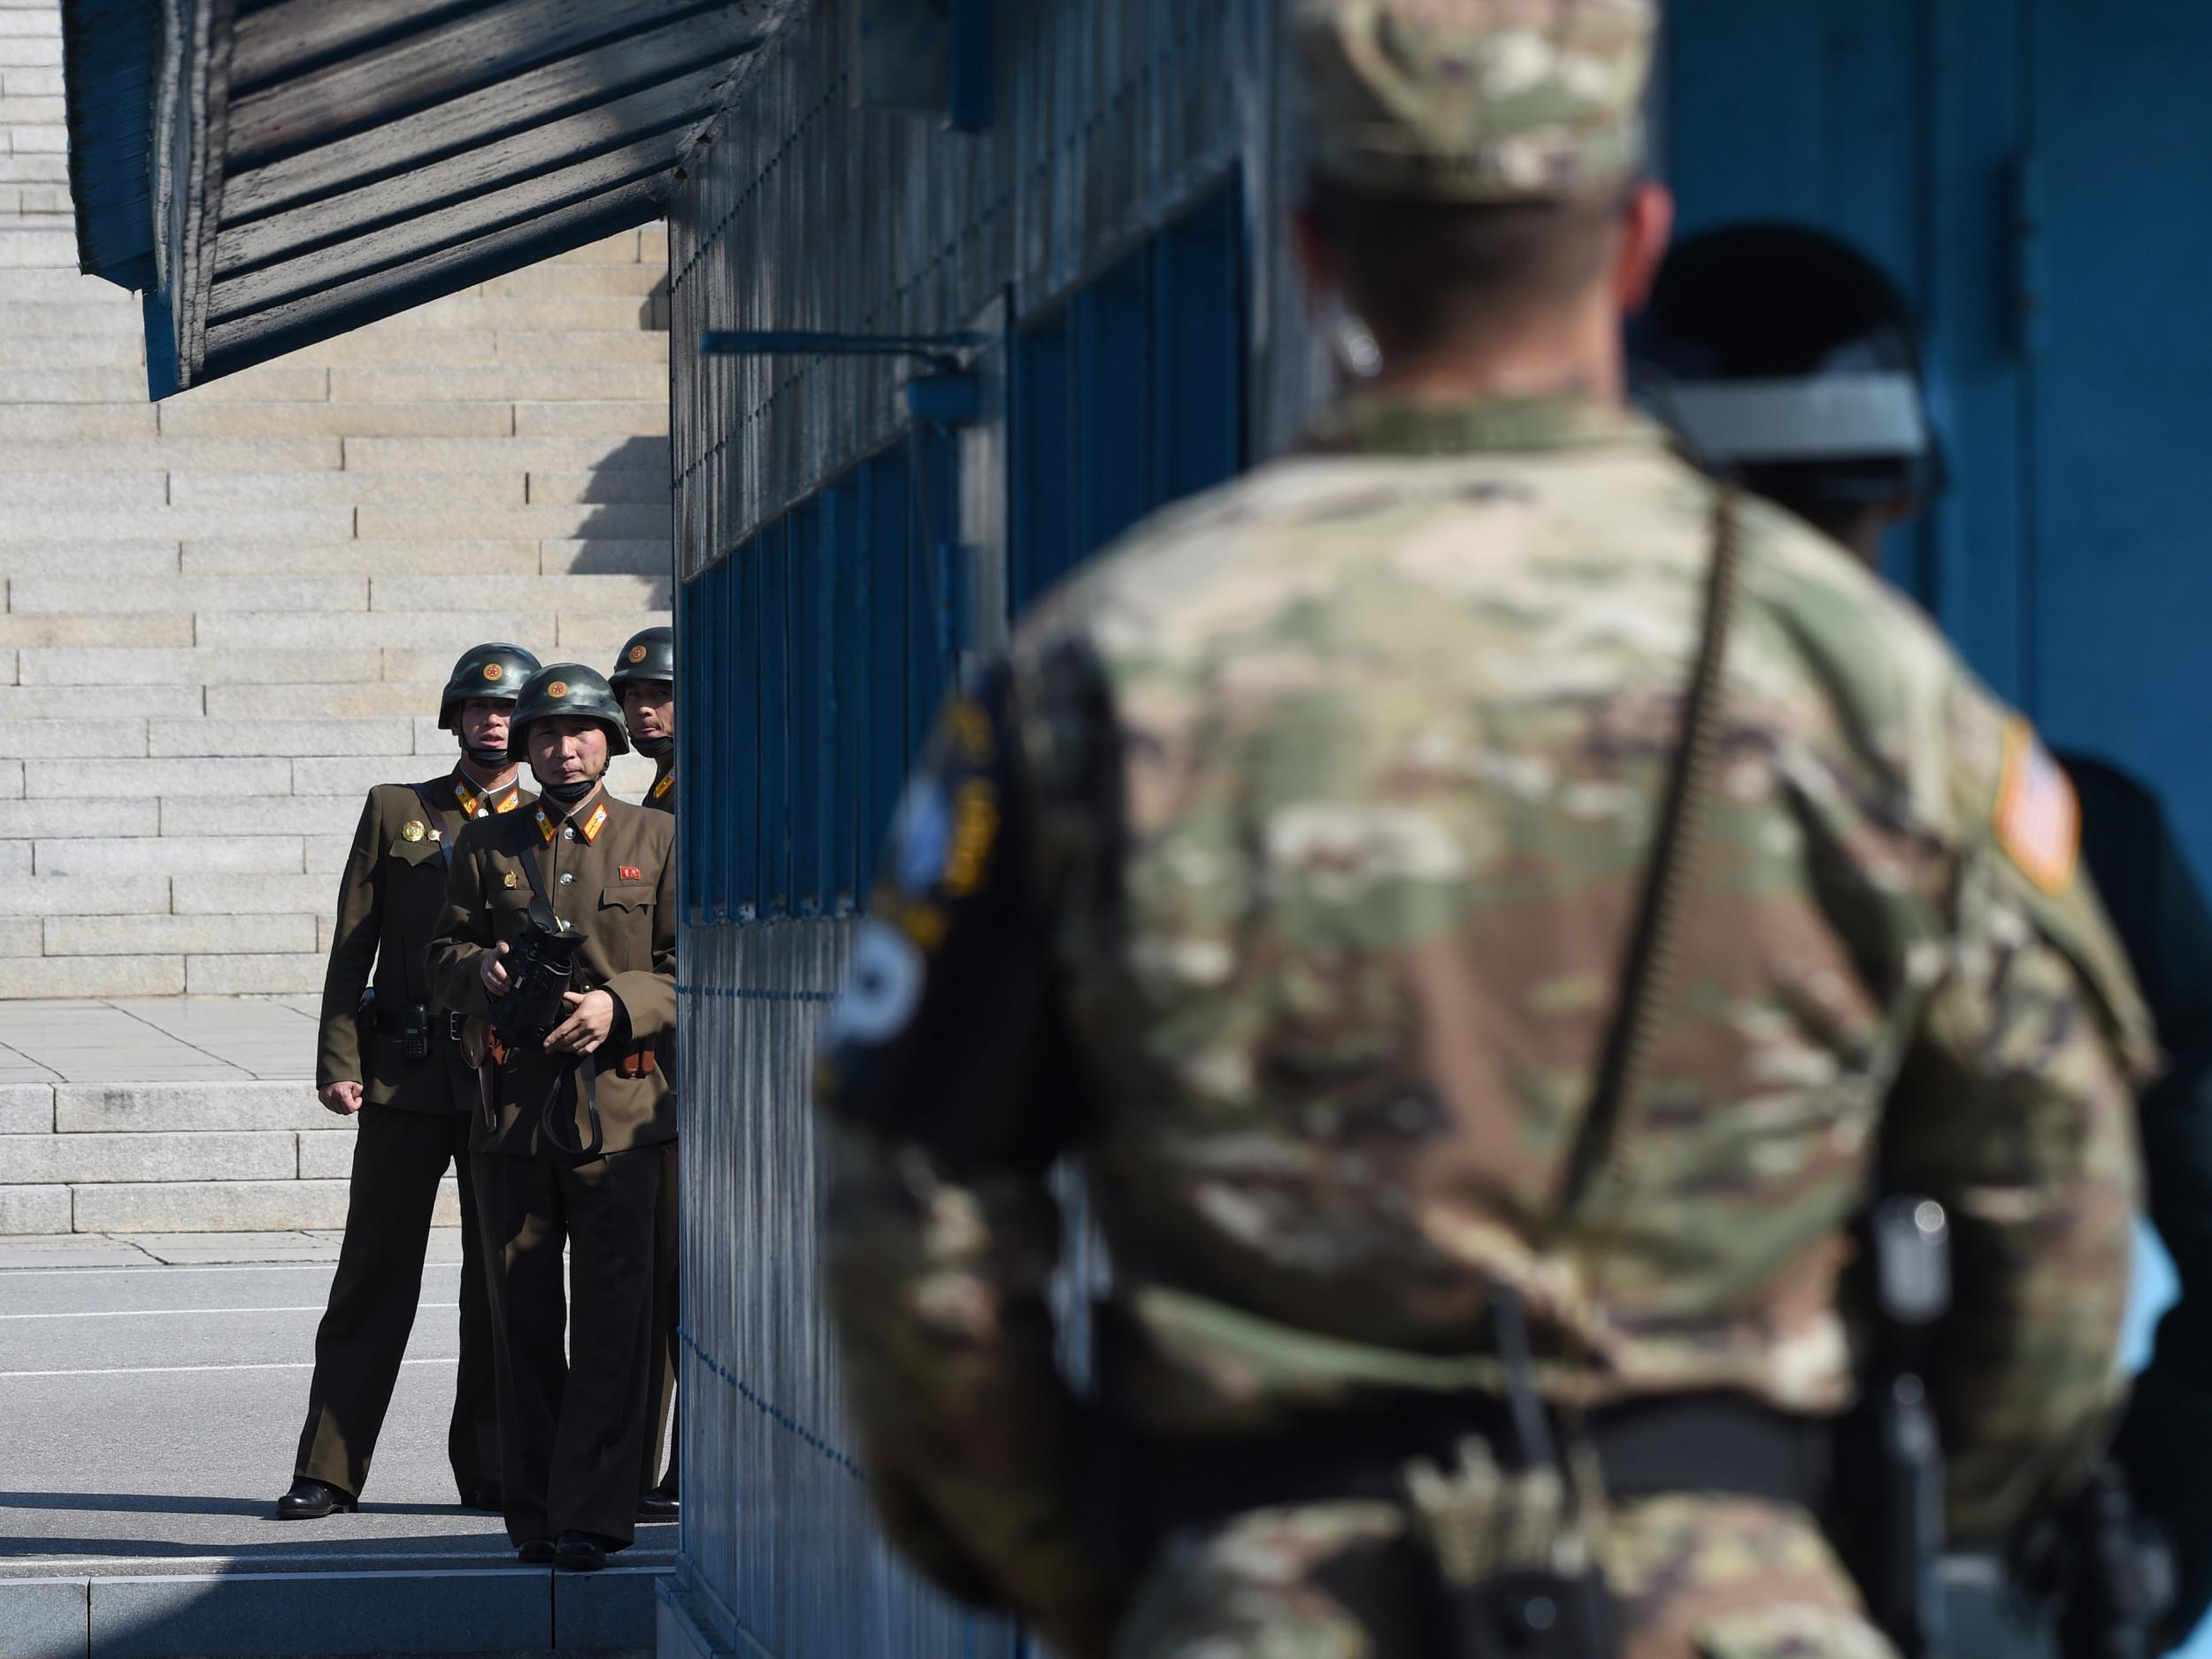 North Korean soldiers look at the South side while US Secretary of Defence Jim Mattis and South Korean Defence Minister Song Young-Moo visit at the truce village of Panmunjom in the Demilitarized Zone on the border between North and South Korea on 27 October 2017